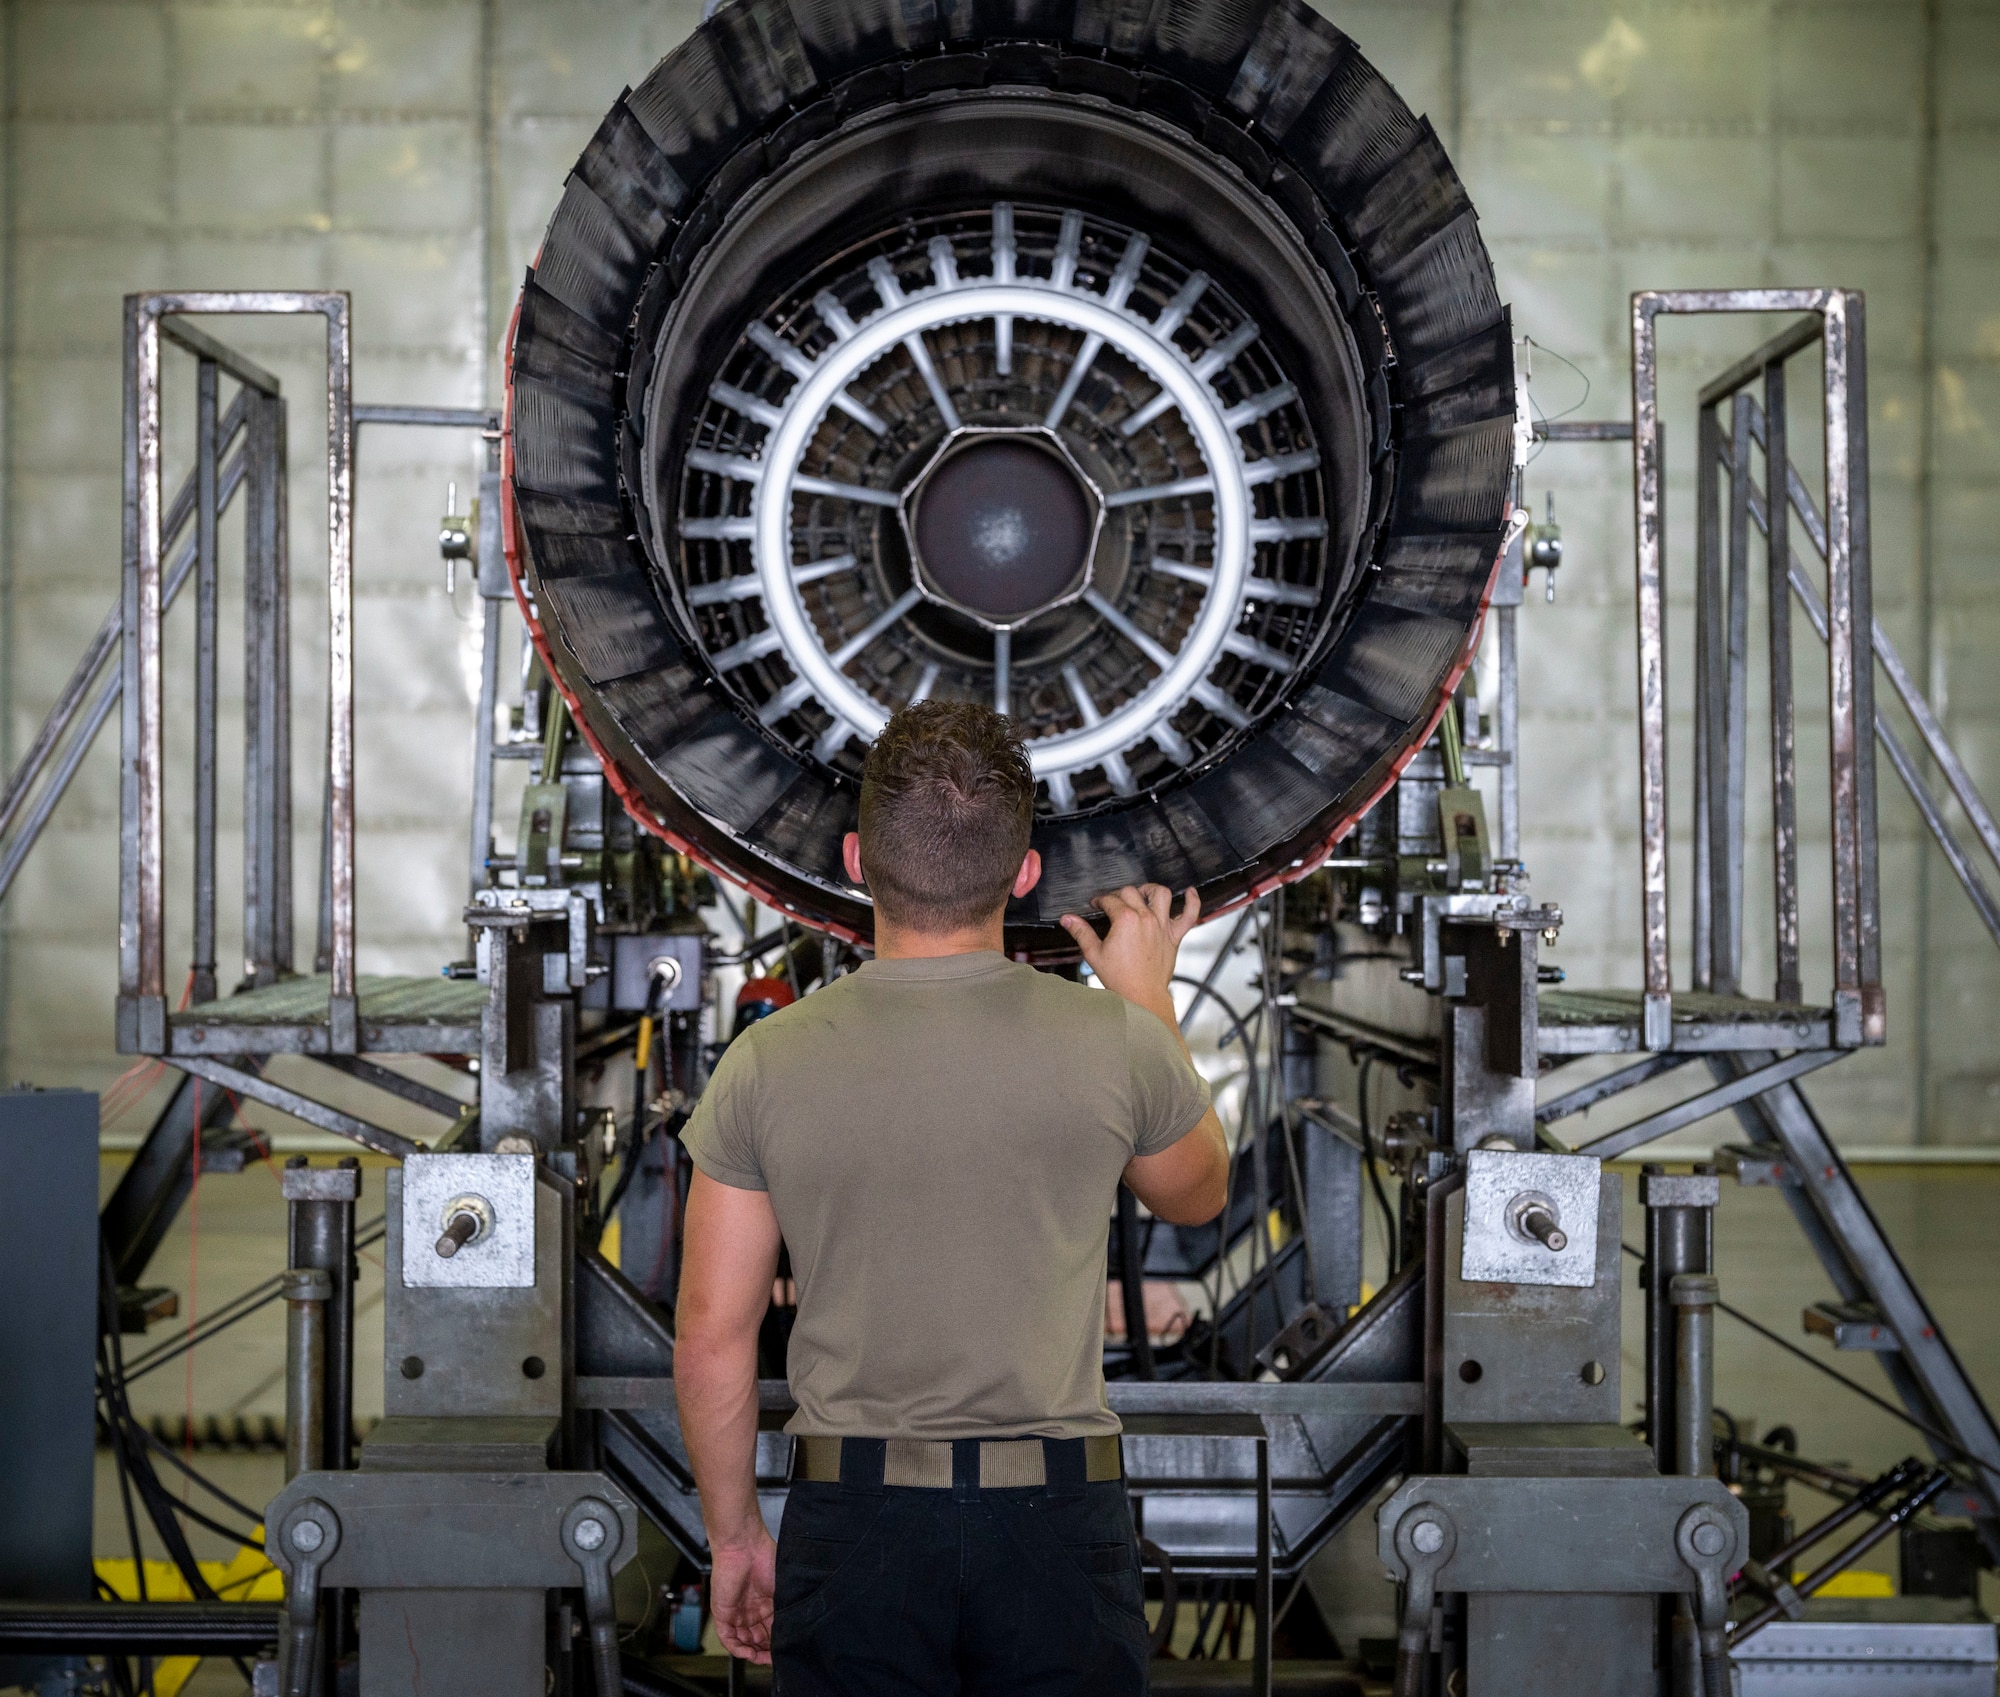 Airman 1st Class Noah Mercer, 4th Component Maintenance Squadron aerospace propulsion technician, inspects the engine of an F-15E Strike Eagle at Seymour Johnson Air Force Base, North Carolina, August 10, 2022. Mercer inspected the engine for foreign object debris to ensure the engine does not malfunction or have dangerous afterburns. (U.S. Air Force photo by Airman 1st Class Sabrina Fuller)